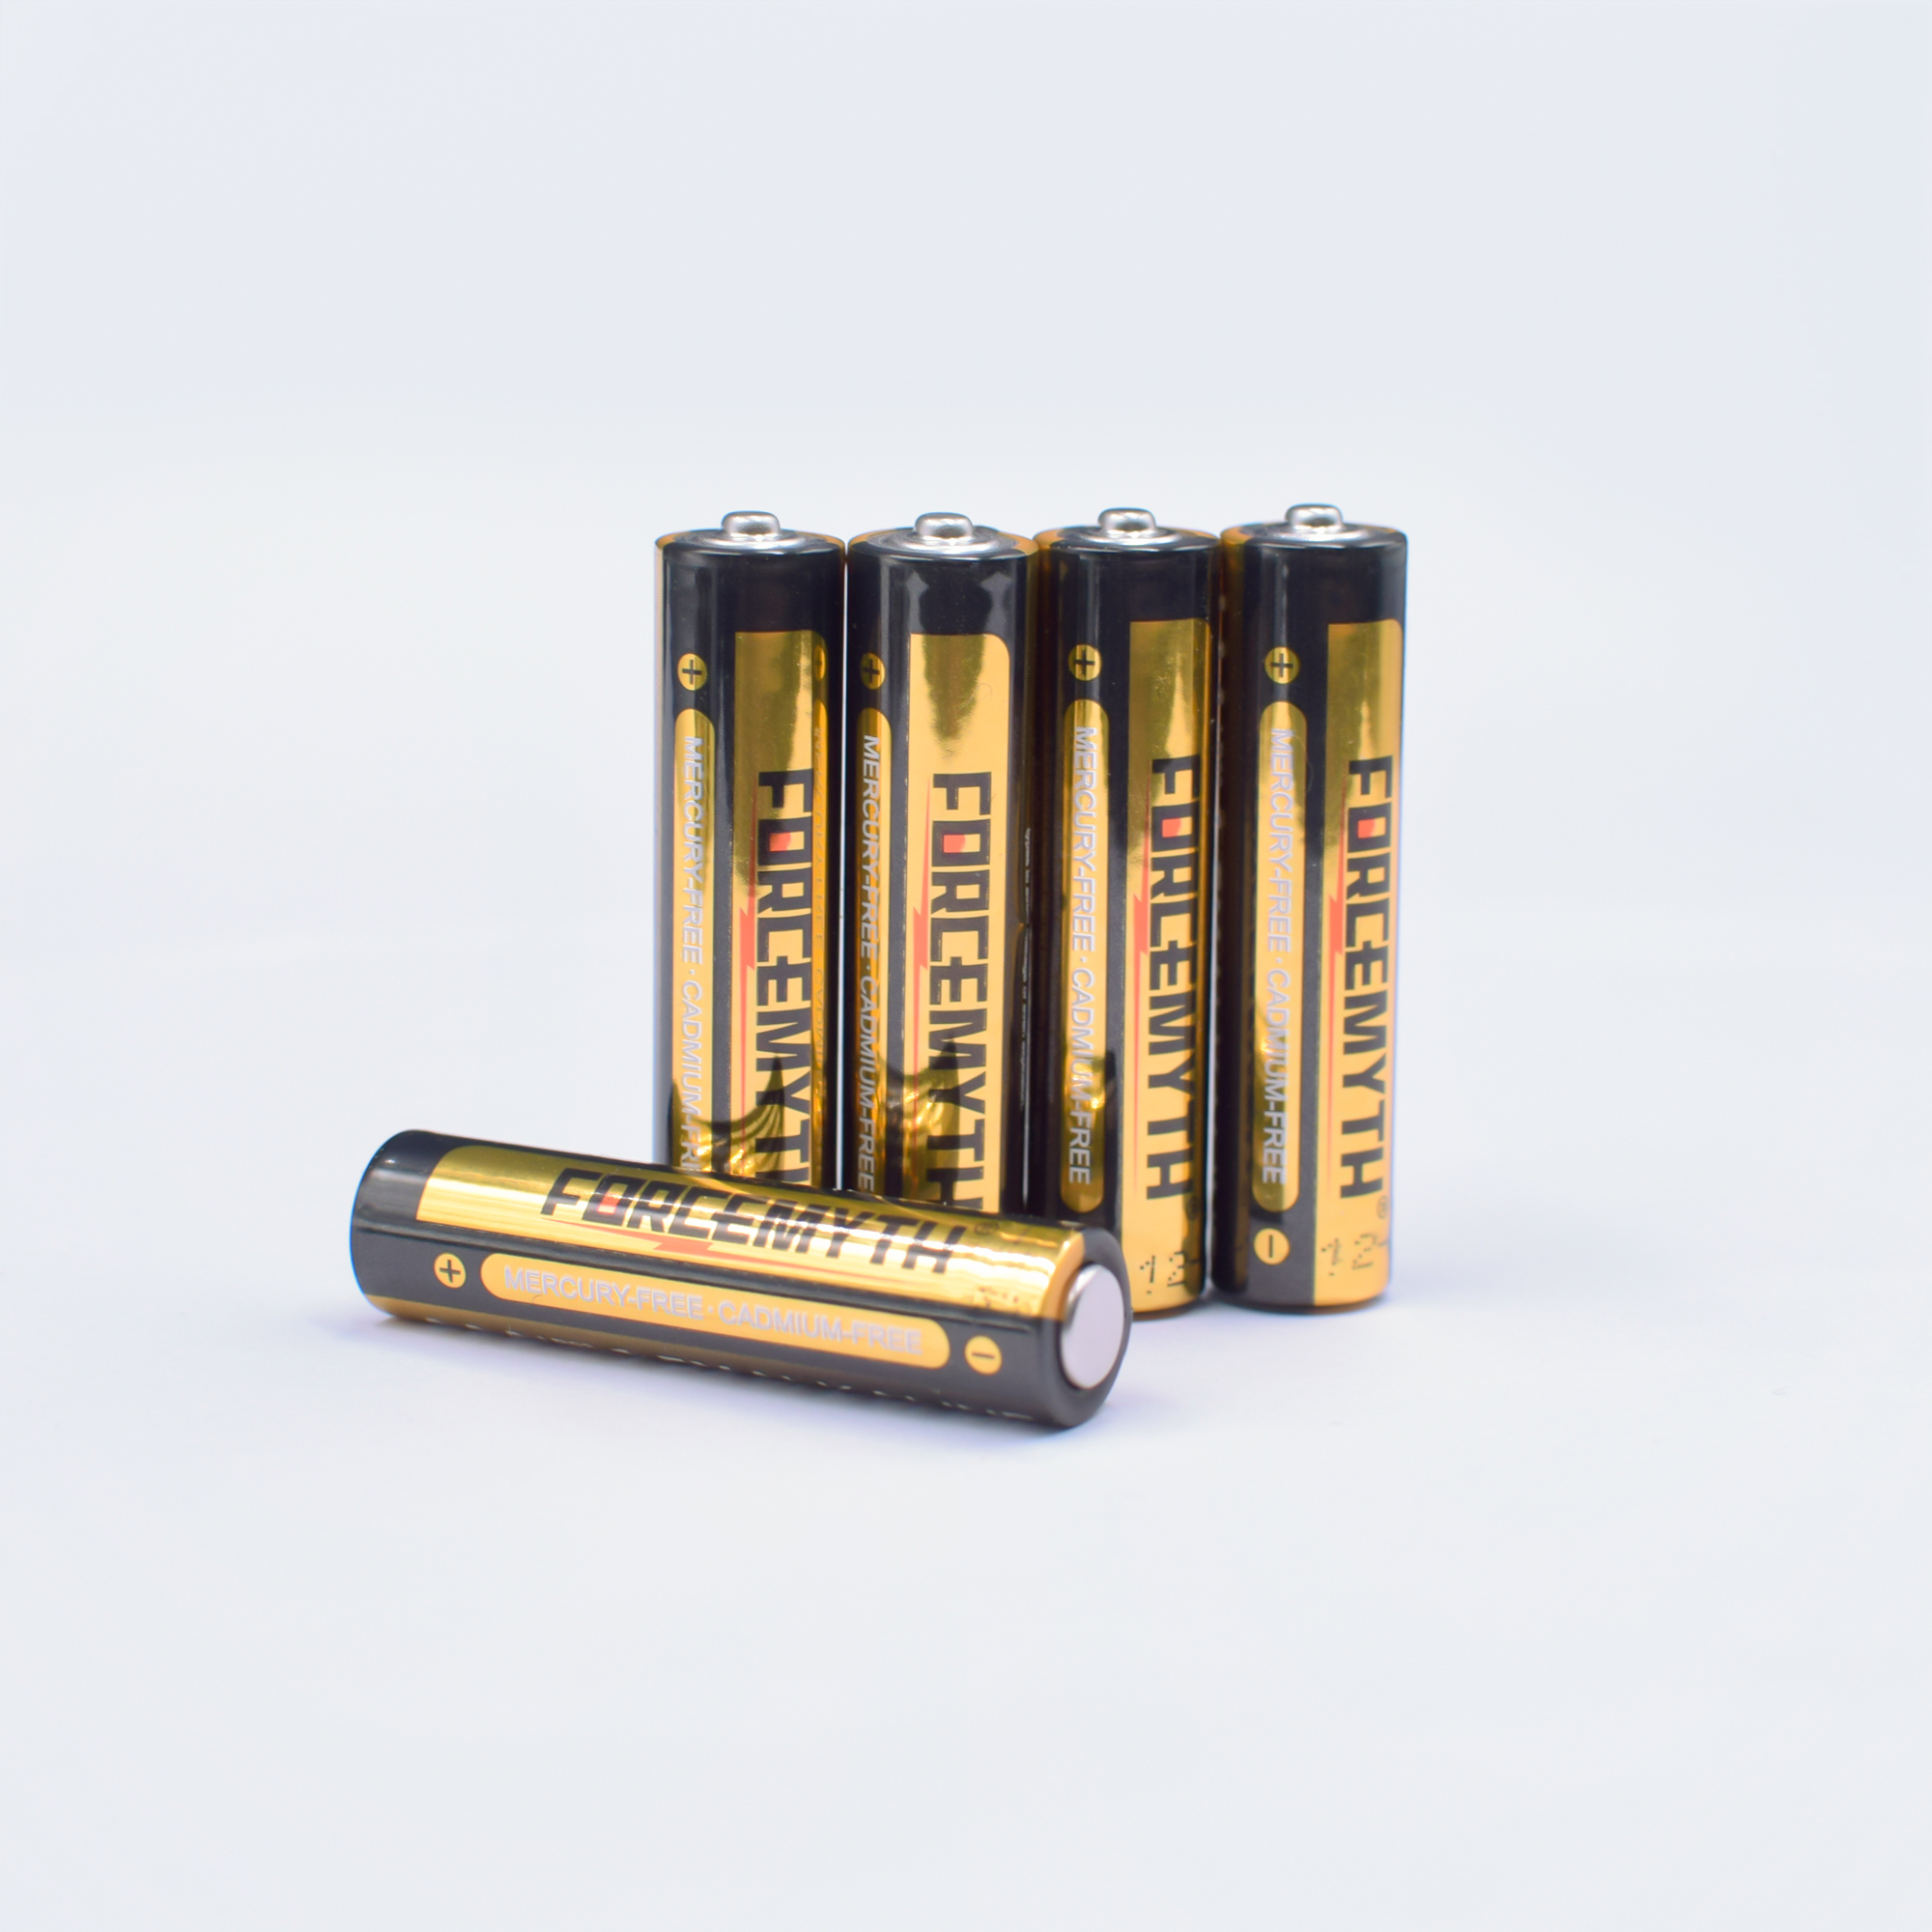 High Quality 1.5V AAA LR03 Alkaline Battery For Toys